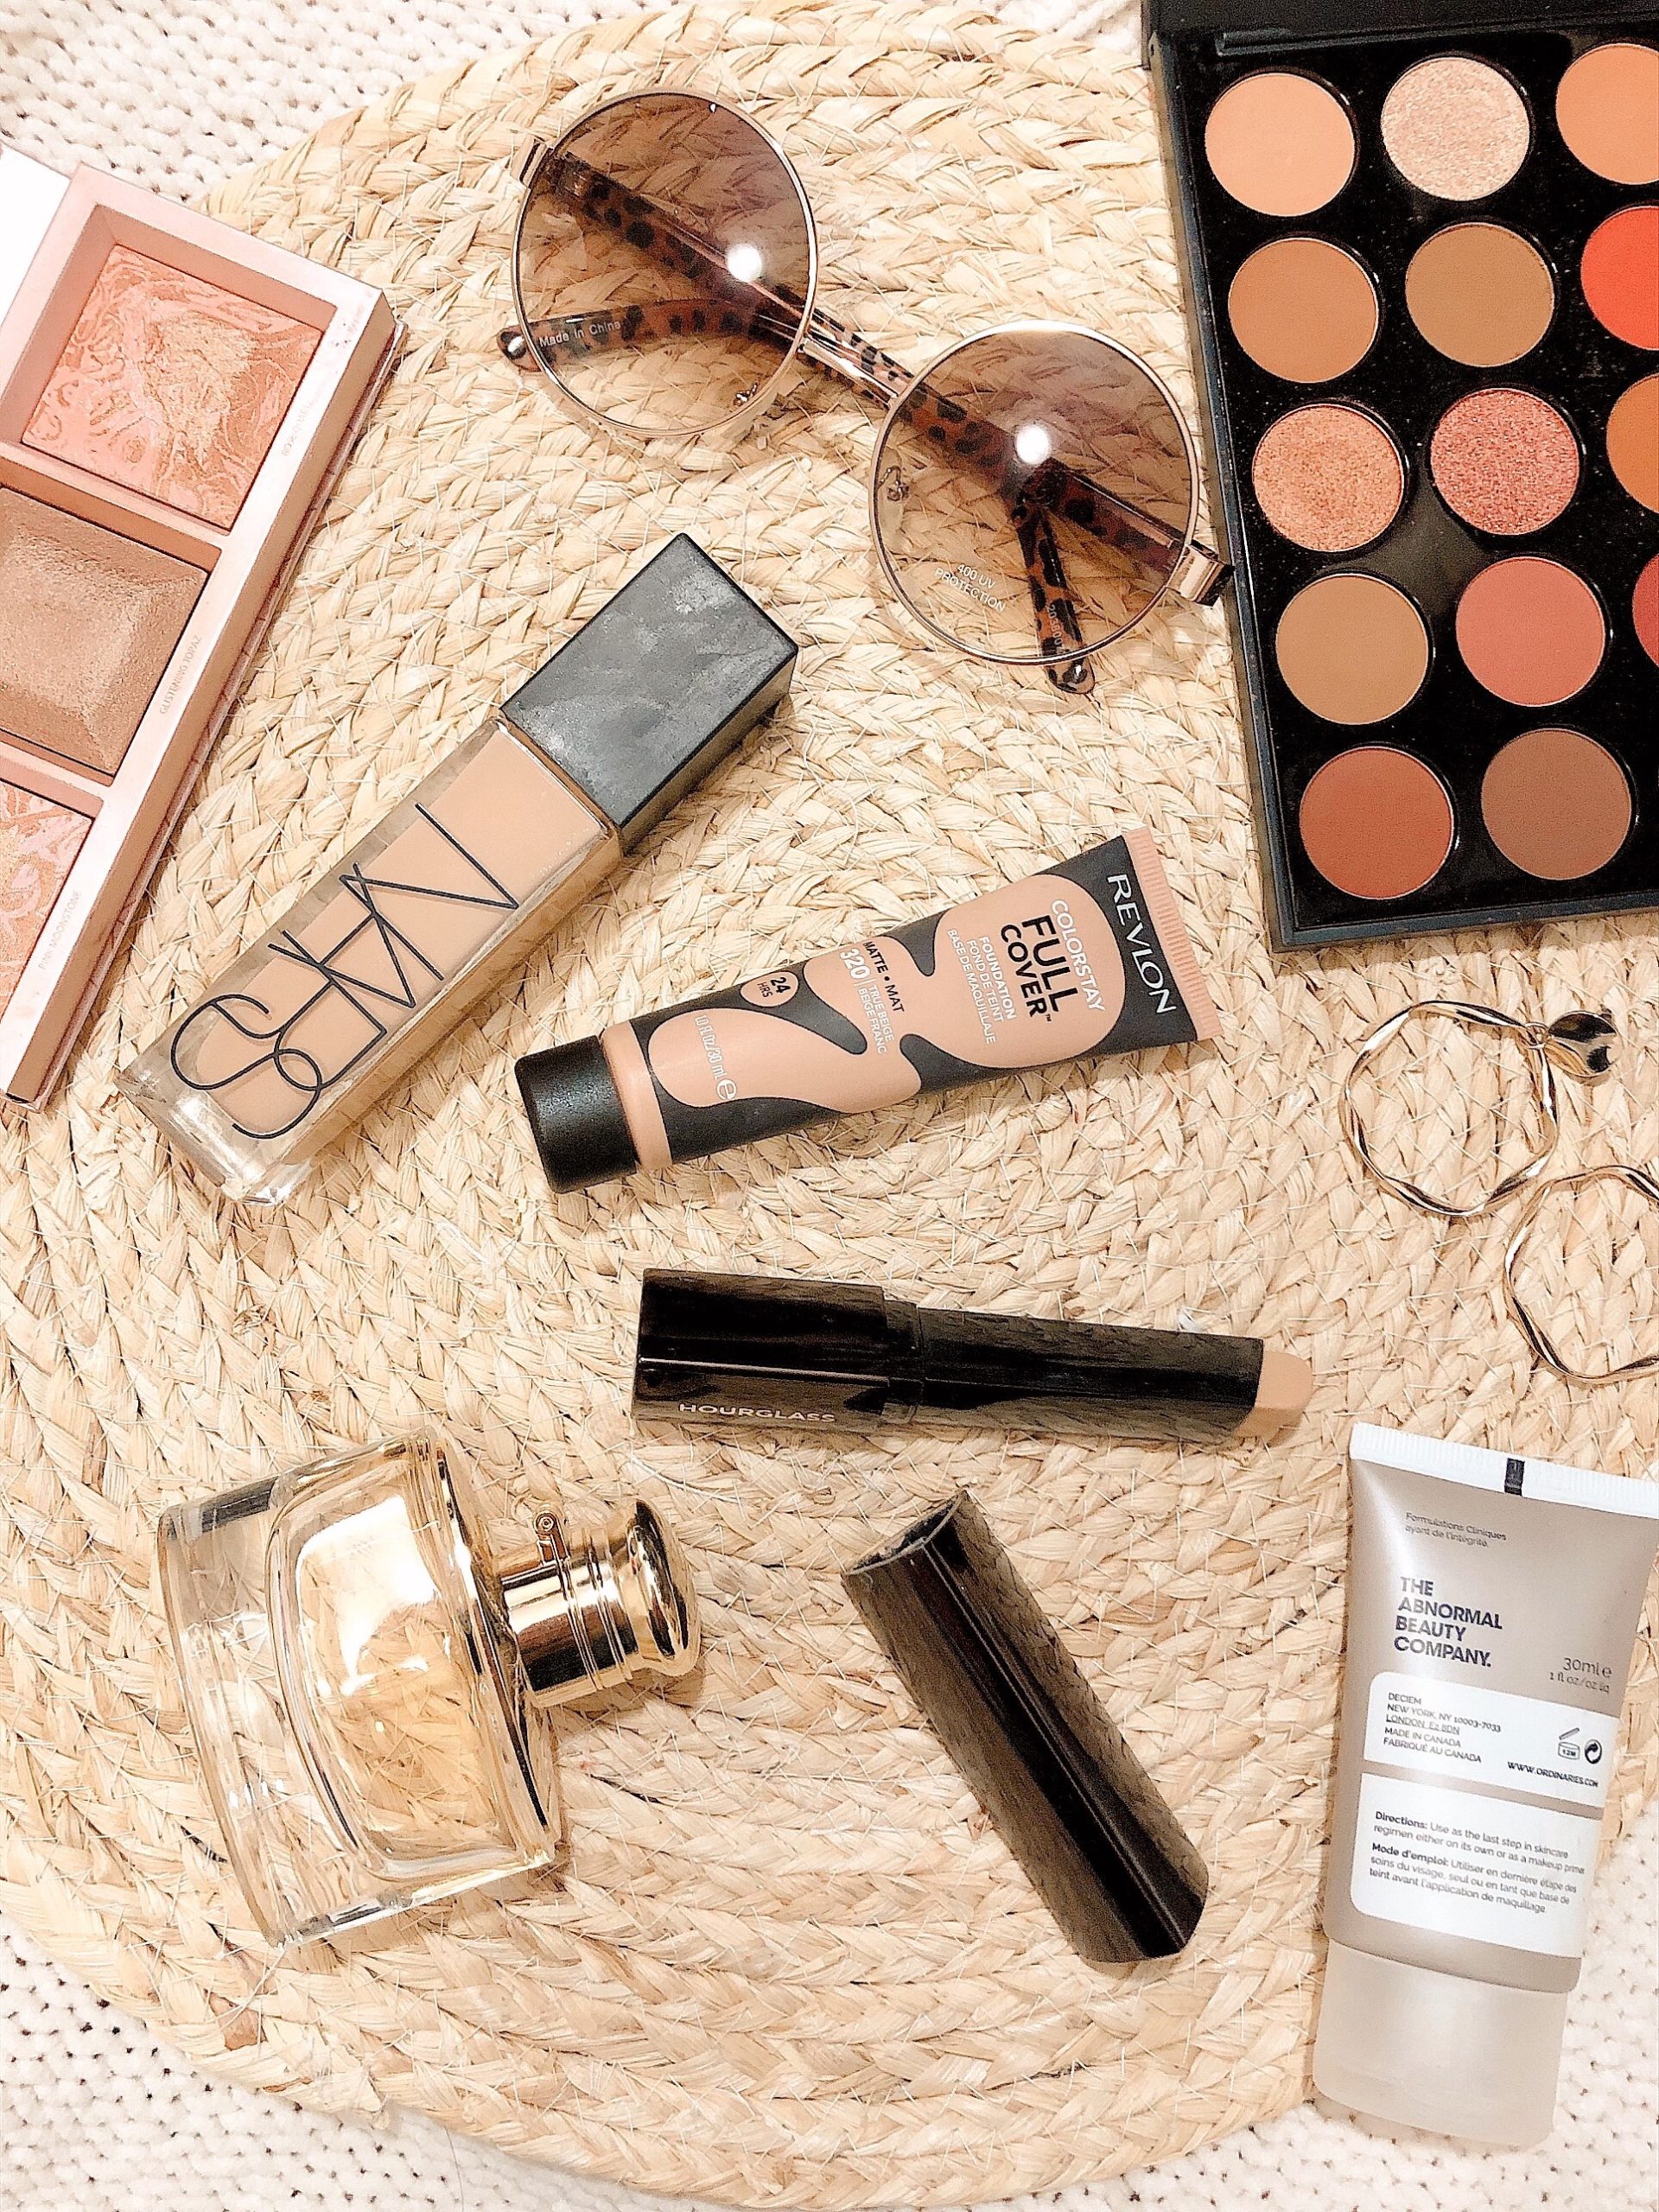 alt="My Most-Used Foundations Right Now"